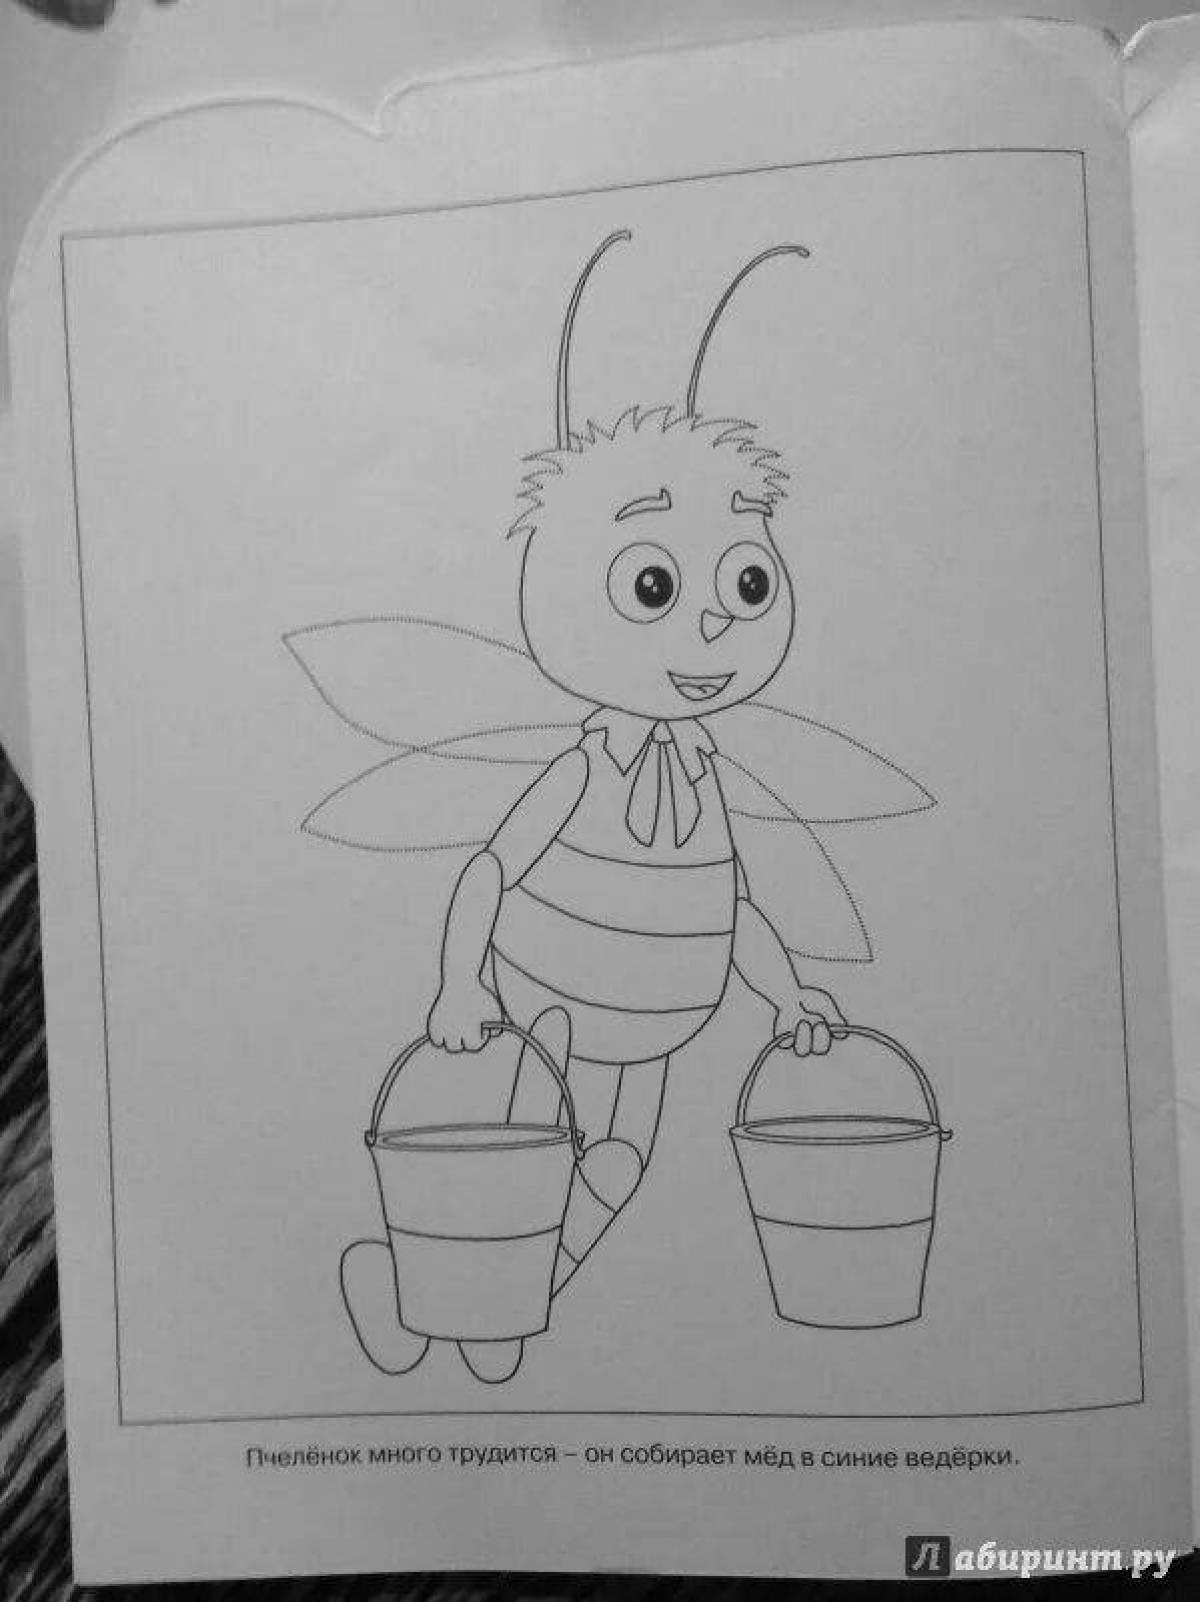 Colouring bright bees